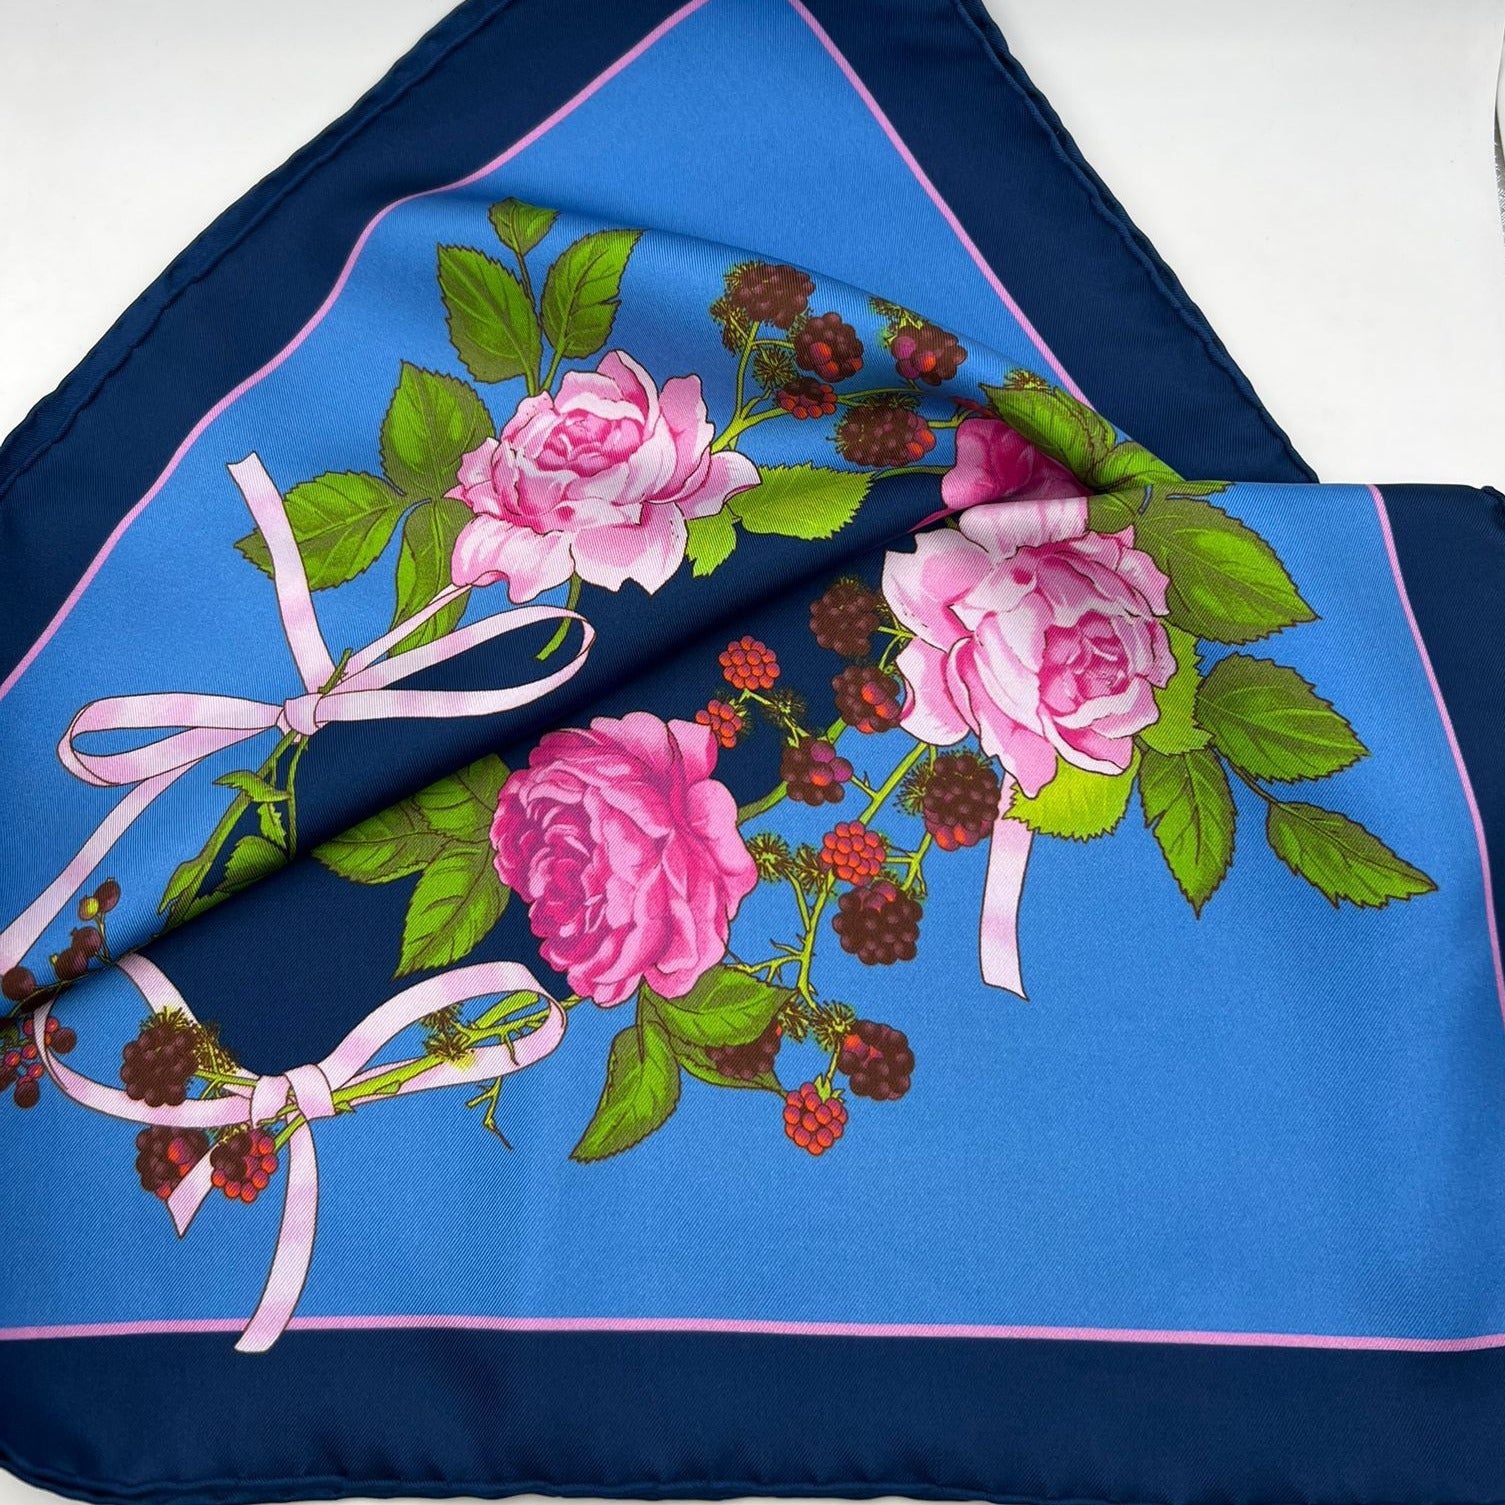 Cruciani & Bella Hand-rolled   100% Silk Floral and Fruity Design Blue and Olimpic Blue Made in Italy 90 cm X 90 cm #7198